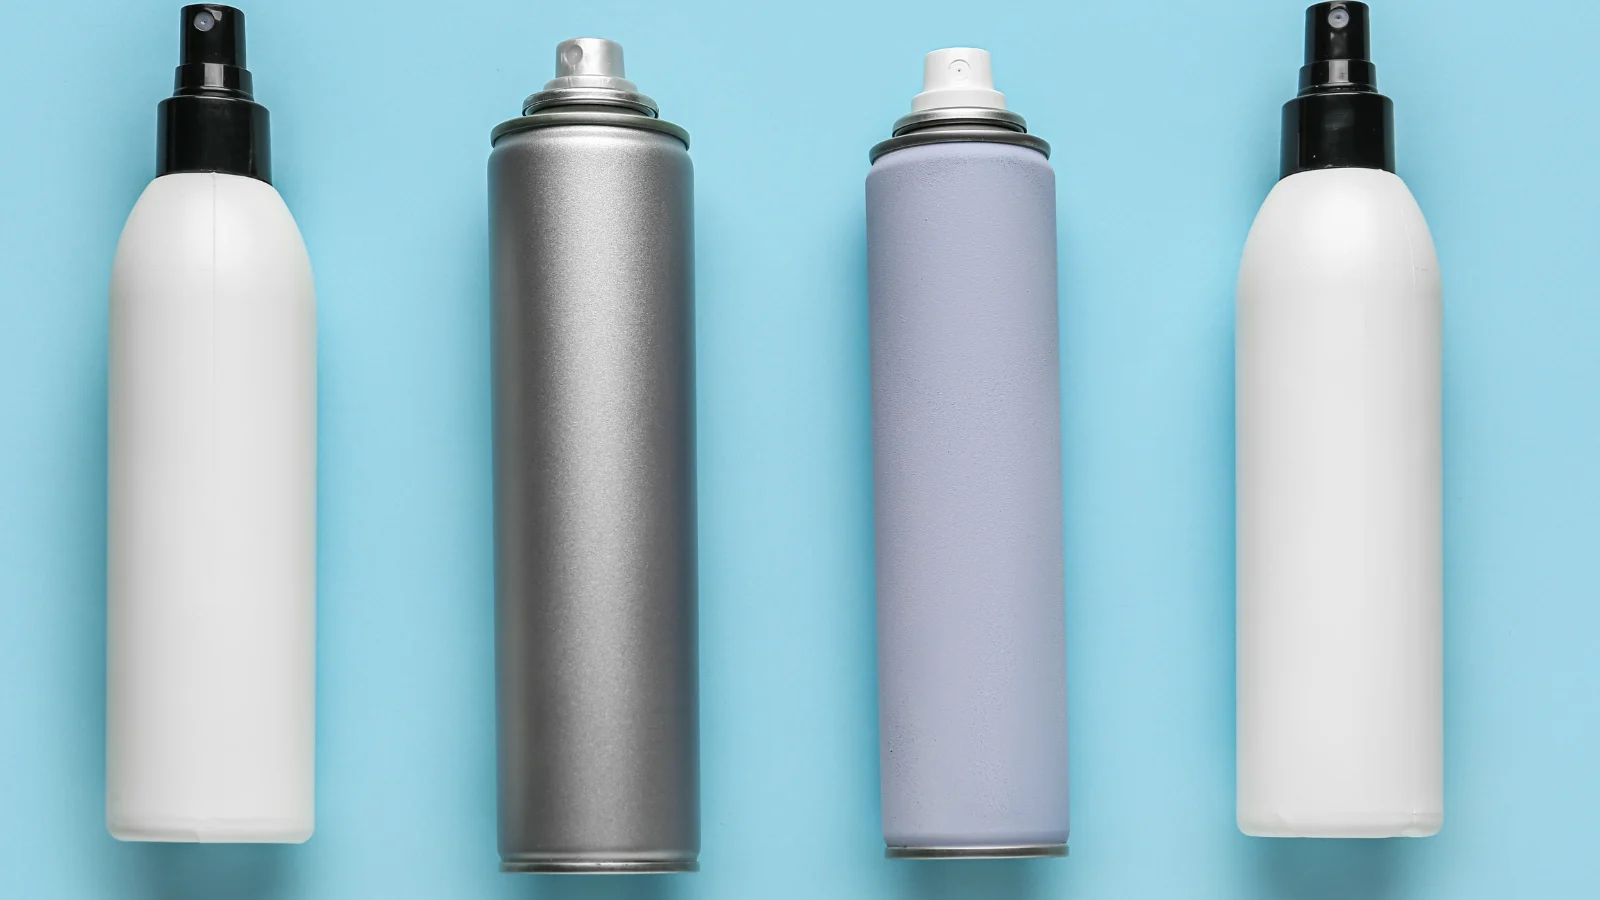 Four different spray bottles on a blue background.